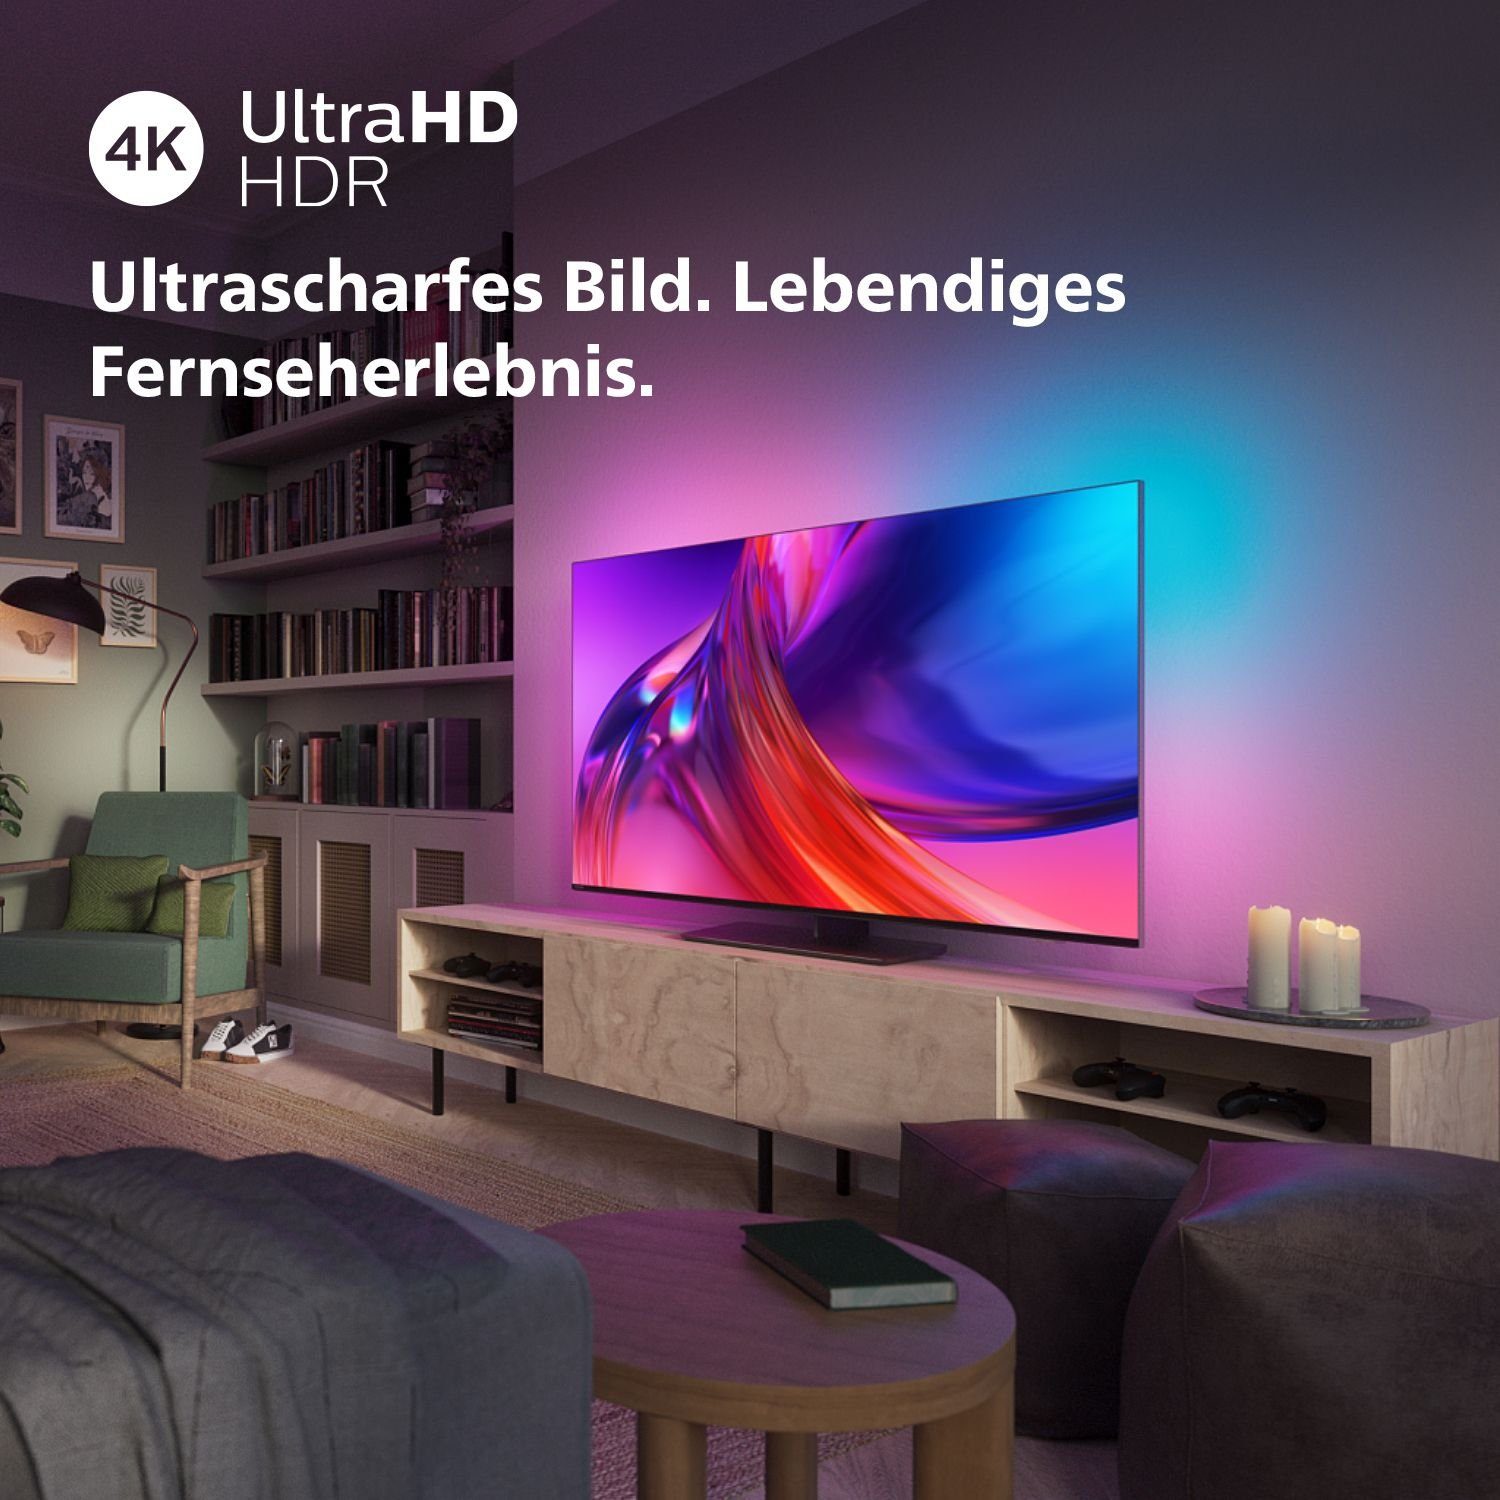 Philips 50PUS8808/12 LED-Fernseher Smart-TV) Ultra TV, Google cm/50 4K Android HD, TV, (126 Zoll